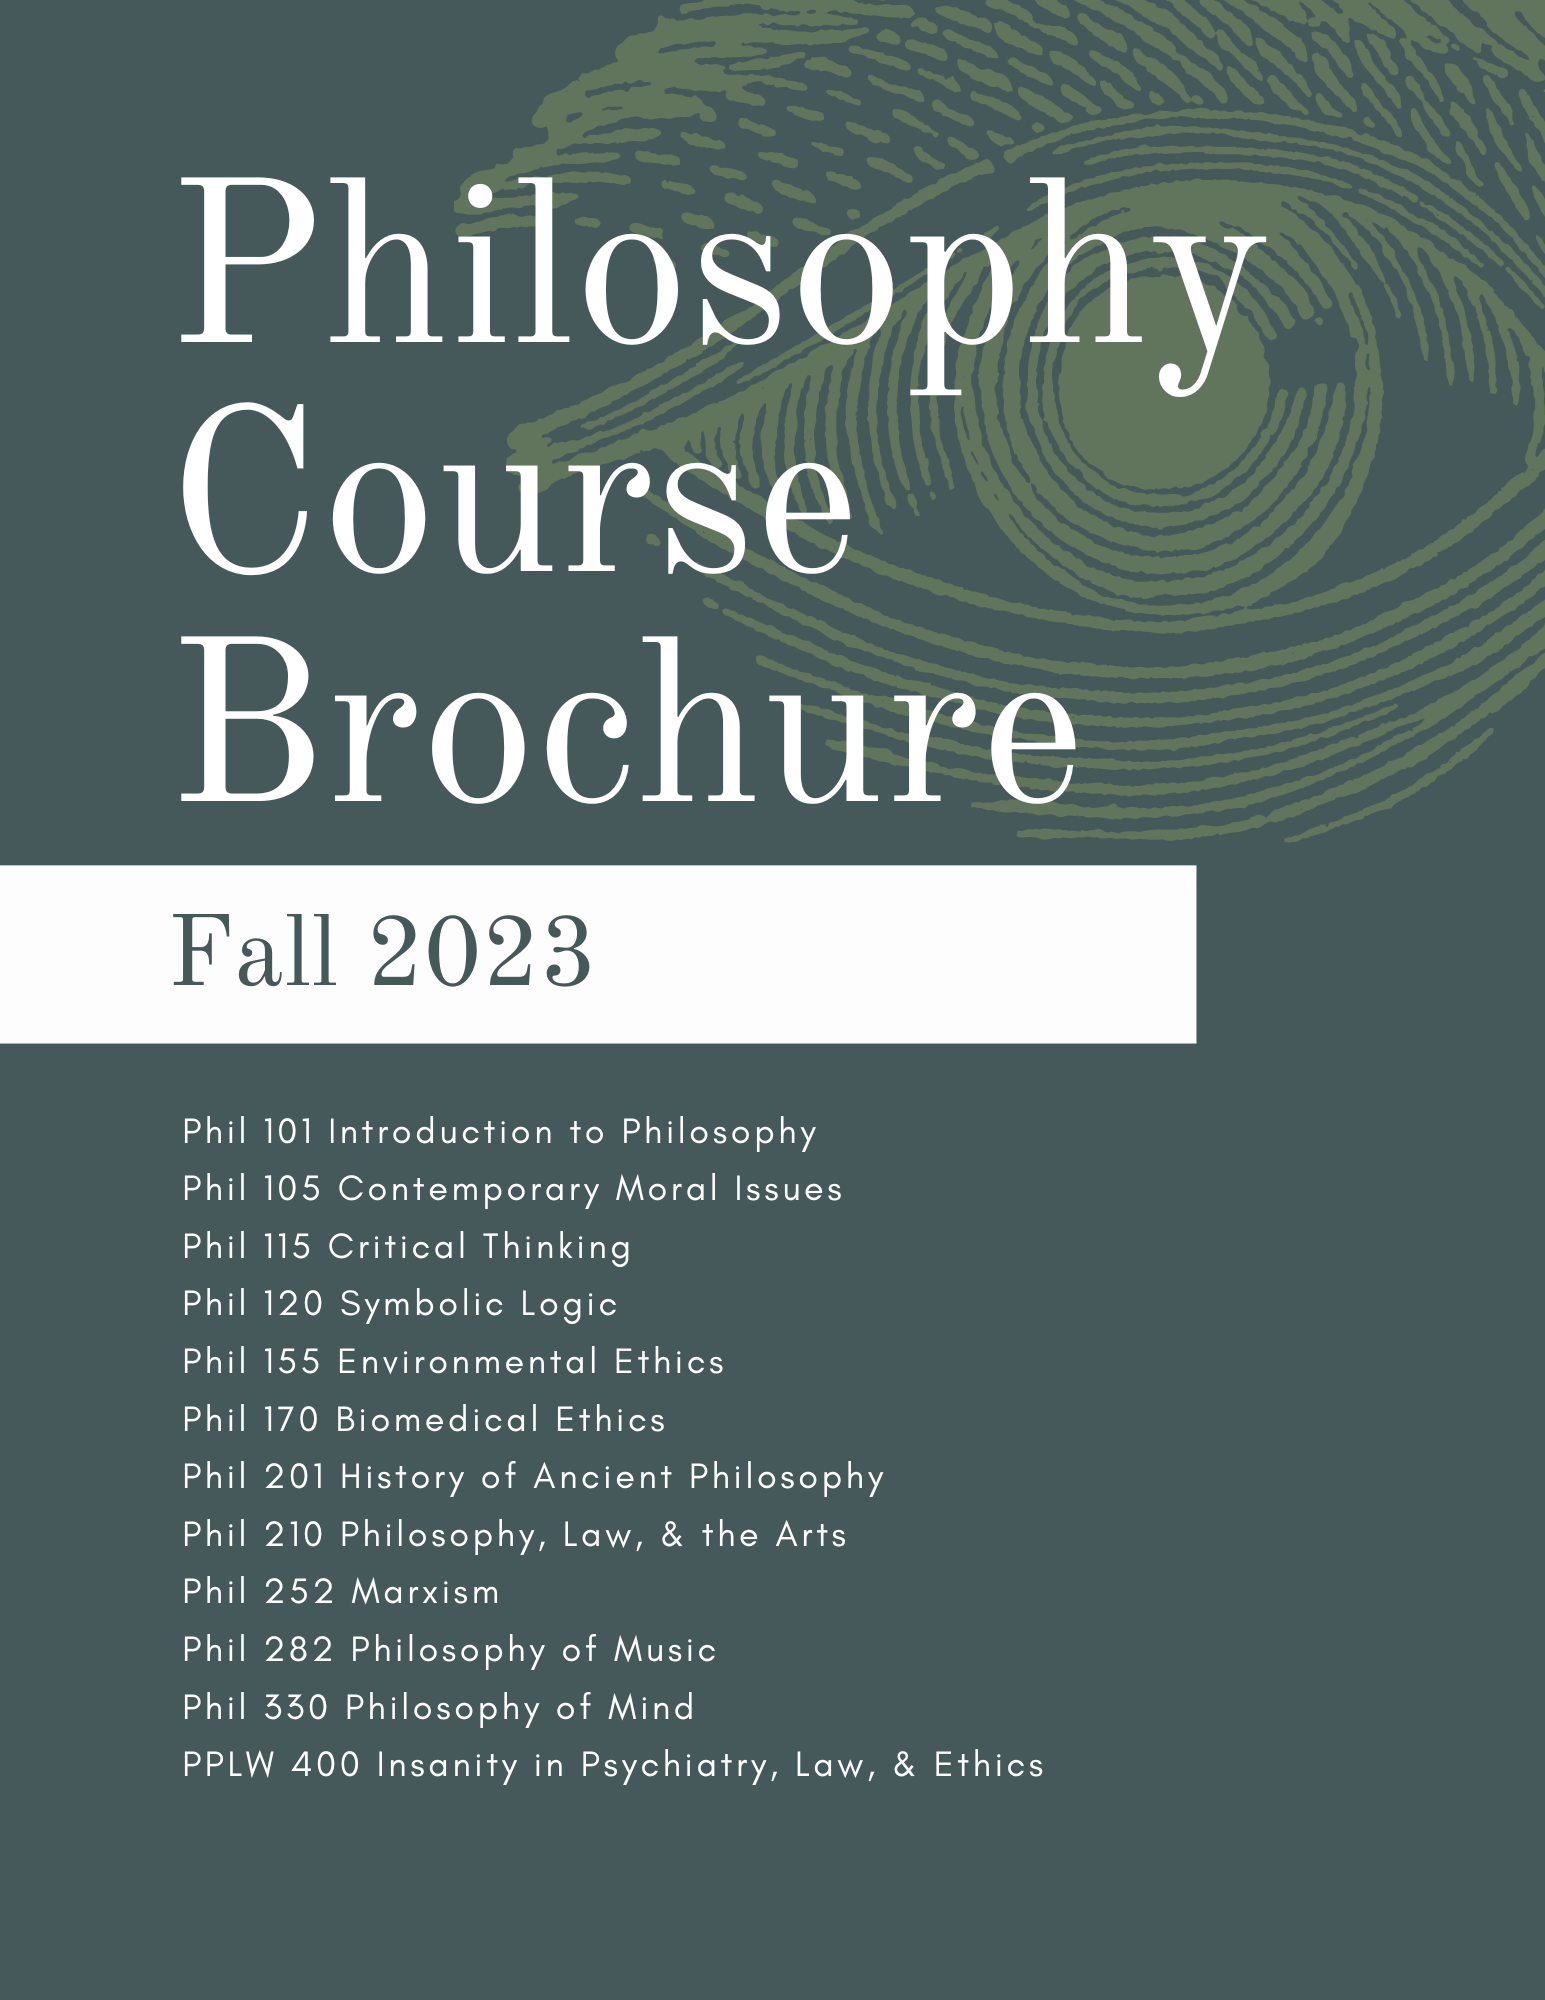 Philosophy Spring 2023 Course Brochure Cover